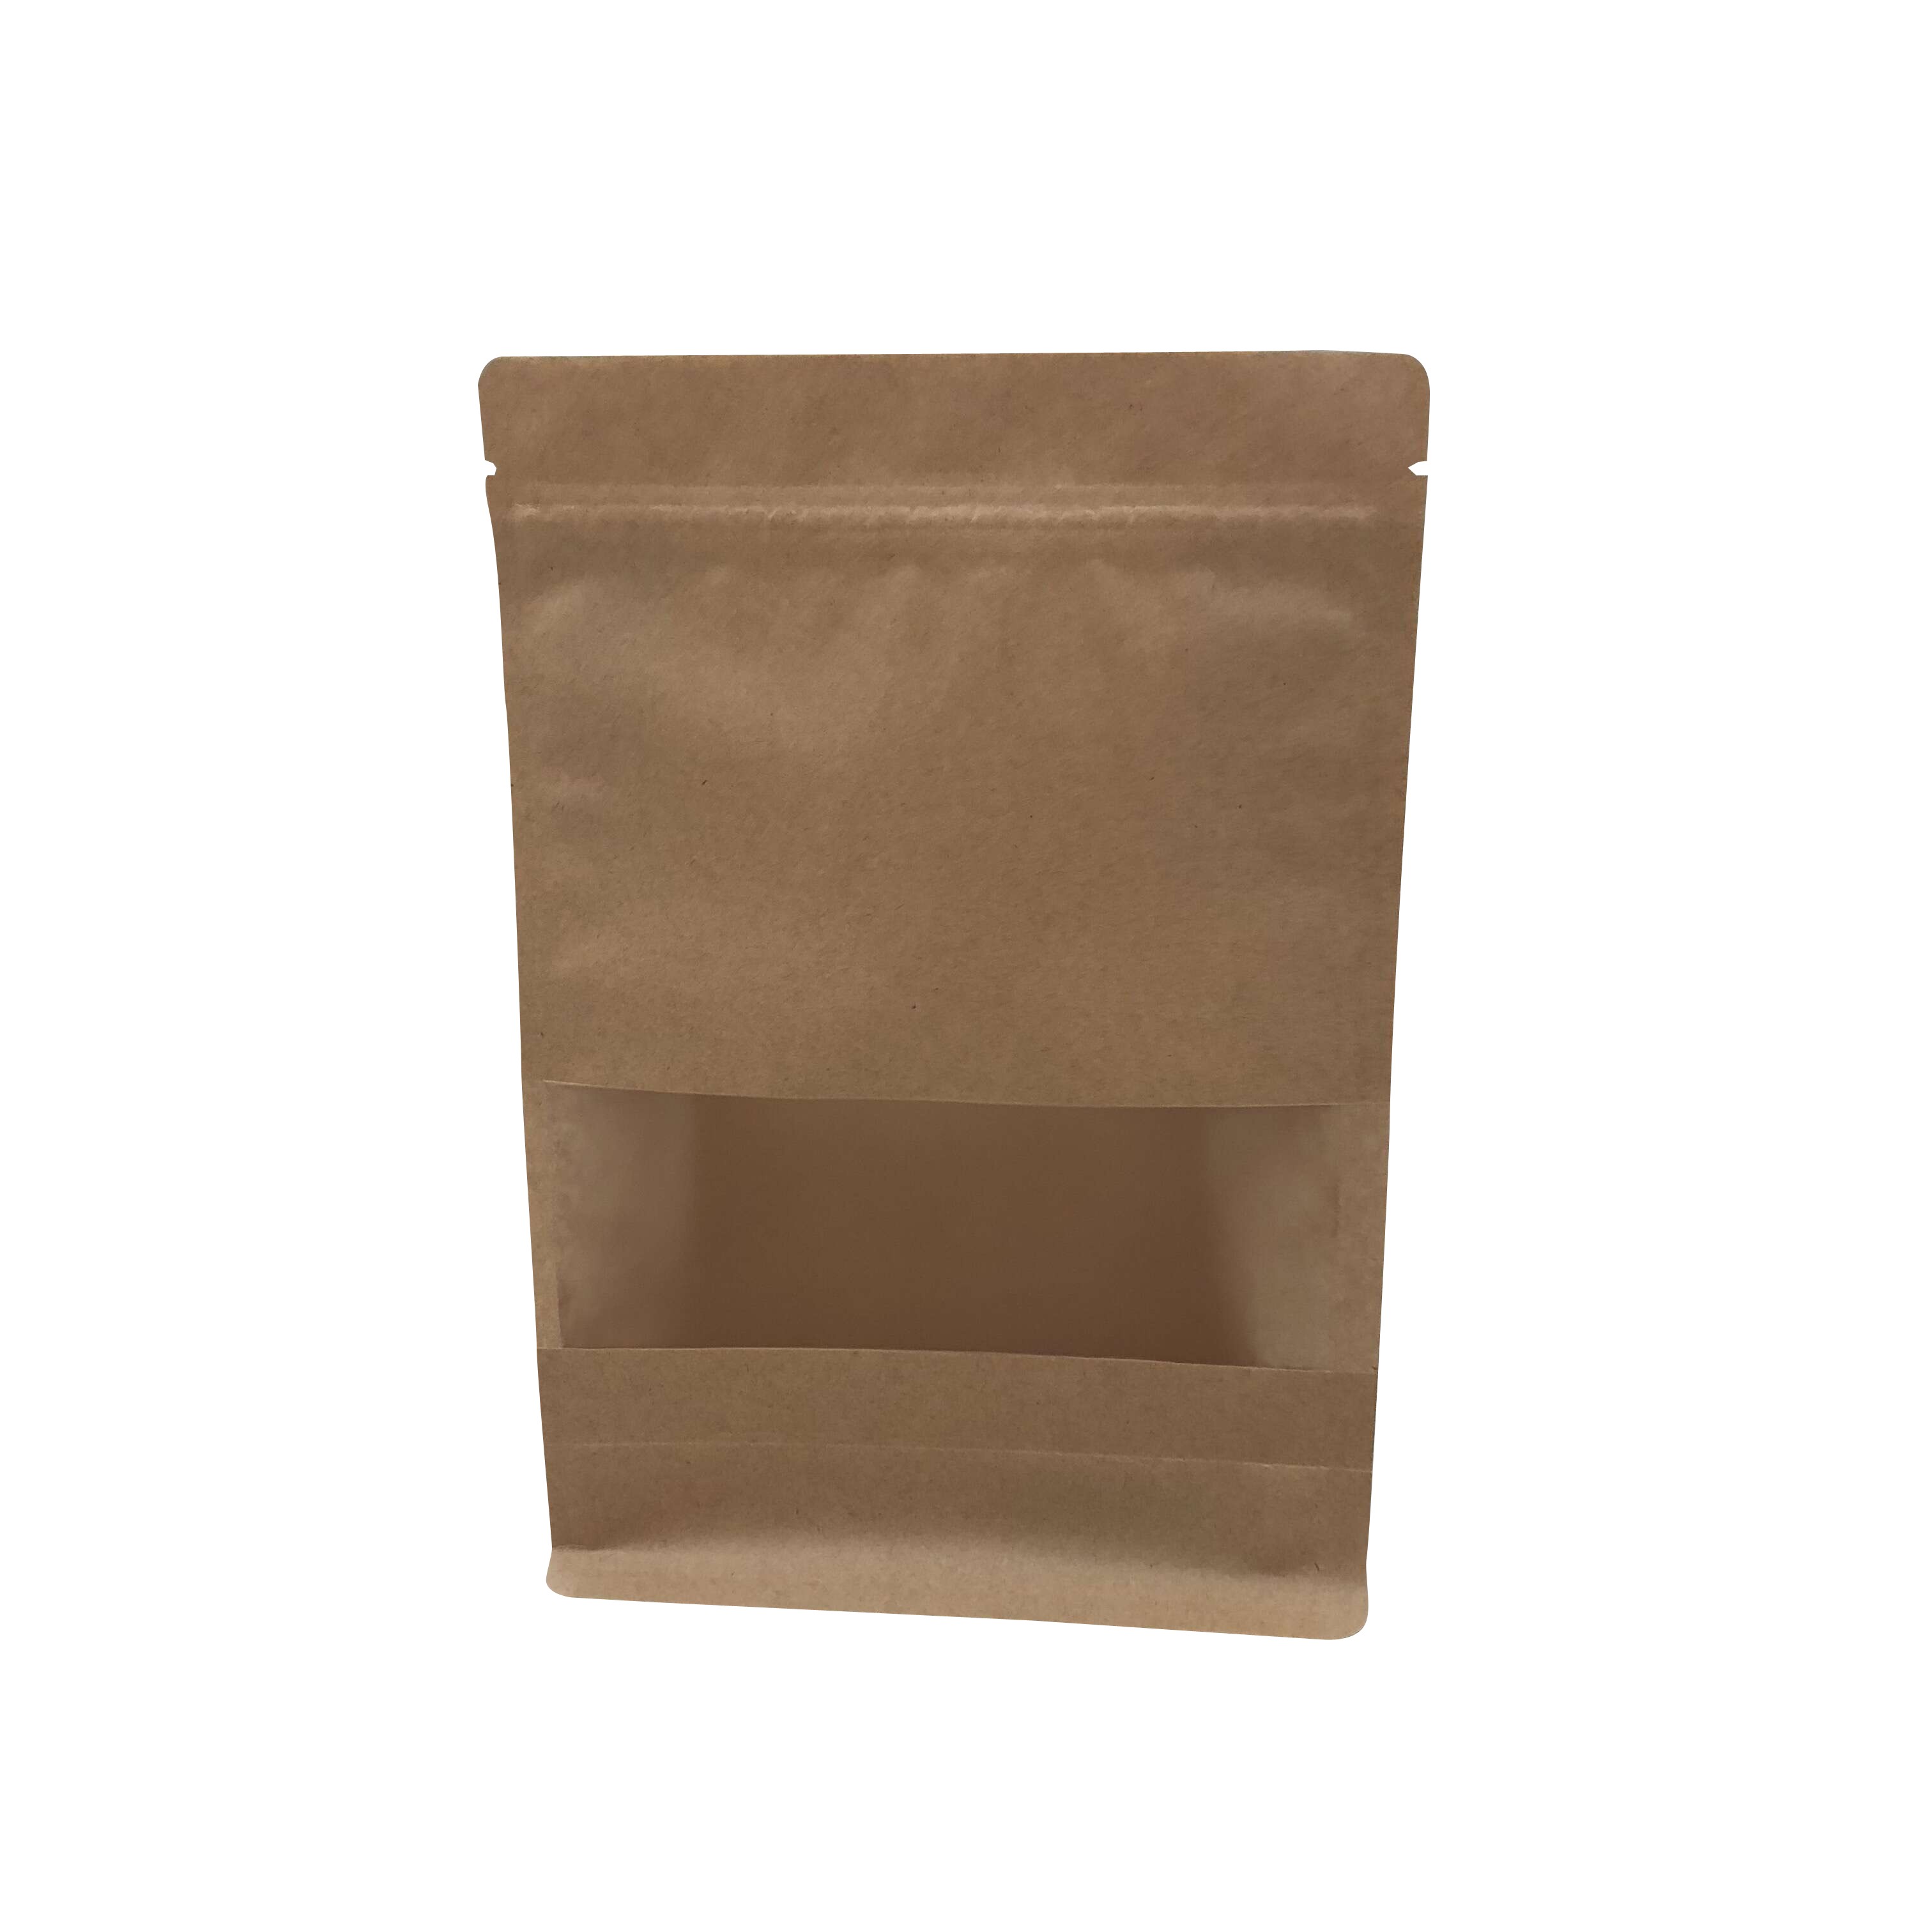 Recyclable flat bottom kraft paper bag, zipper paper bag, food packaging pouch with window, Ready to ship doy pack 1Pack=100 pieces